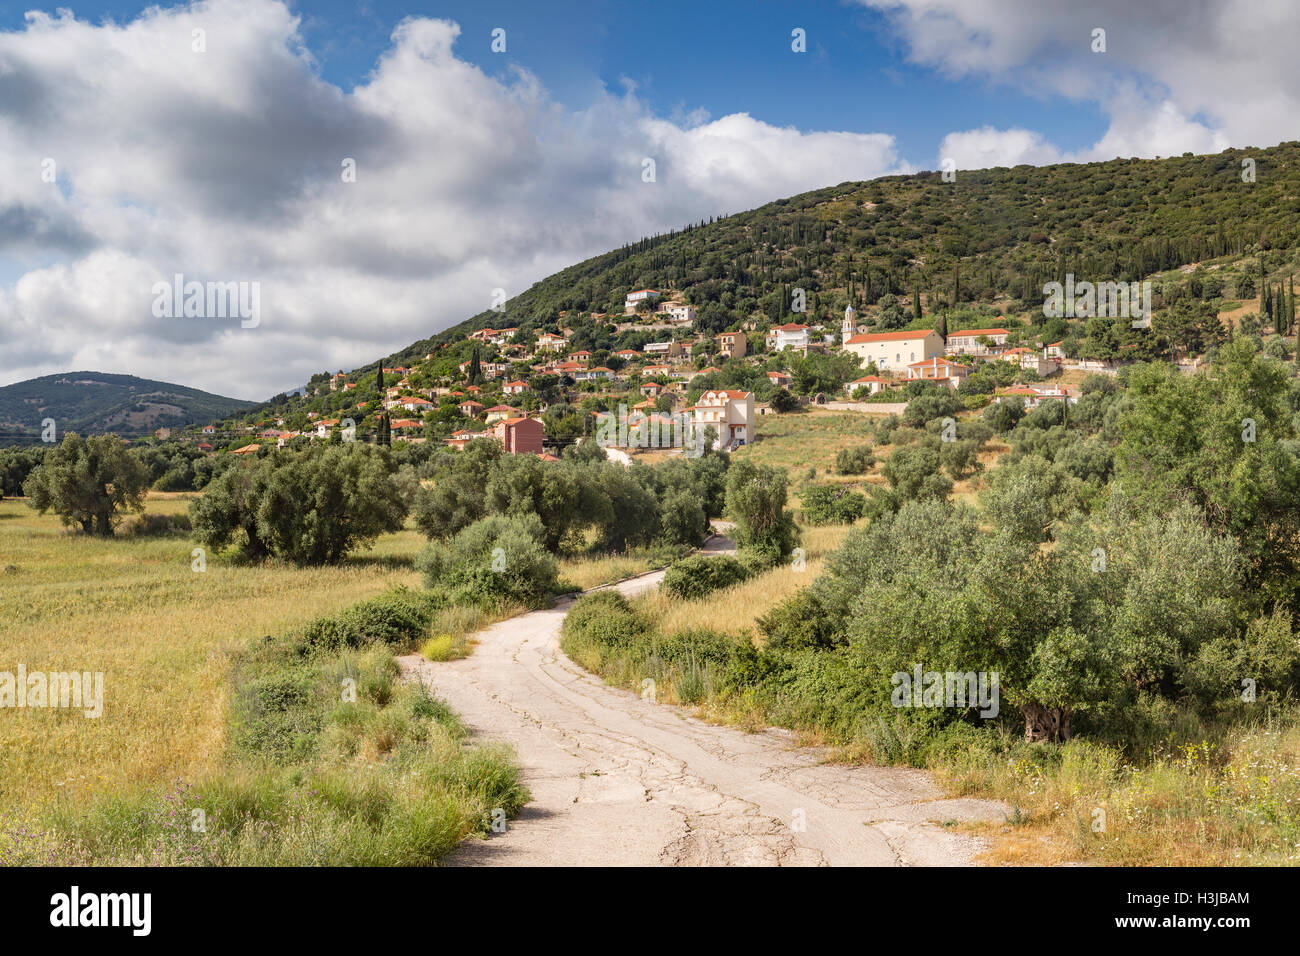 Troianata, Cephalonia, has a winding road up to the villlage, which is situated on a hillside. Stock Photo